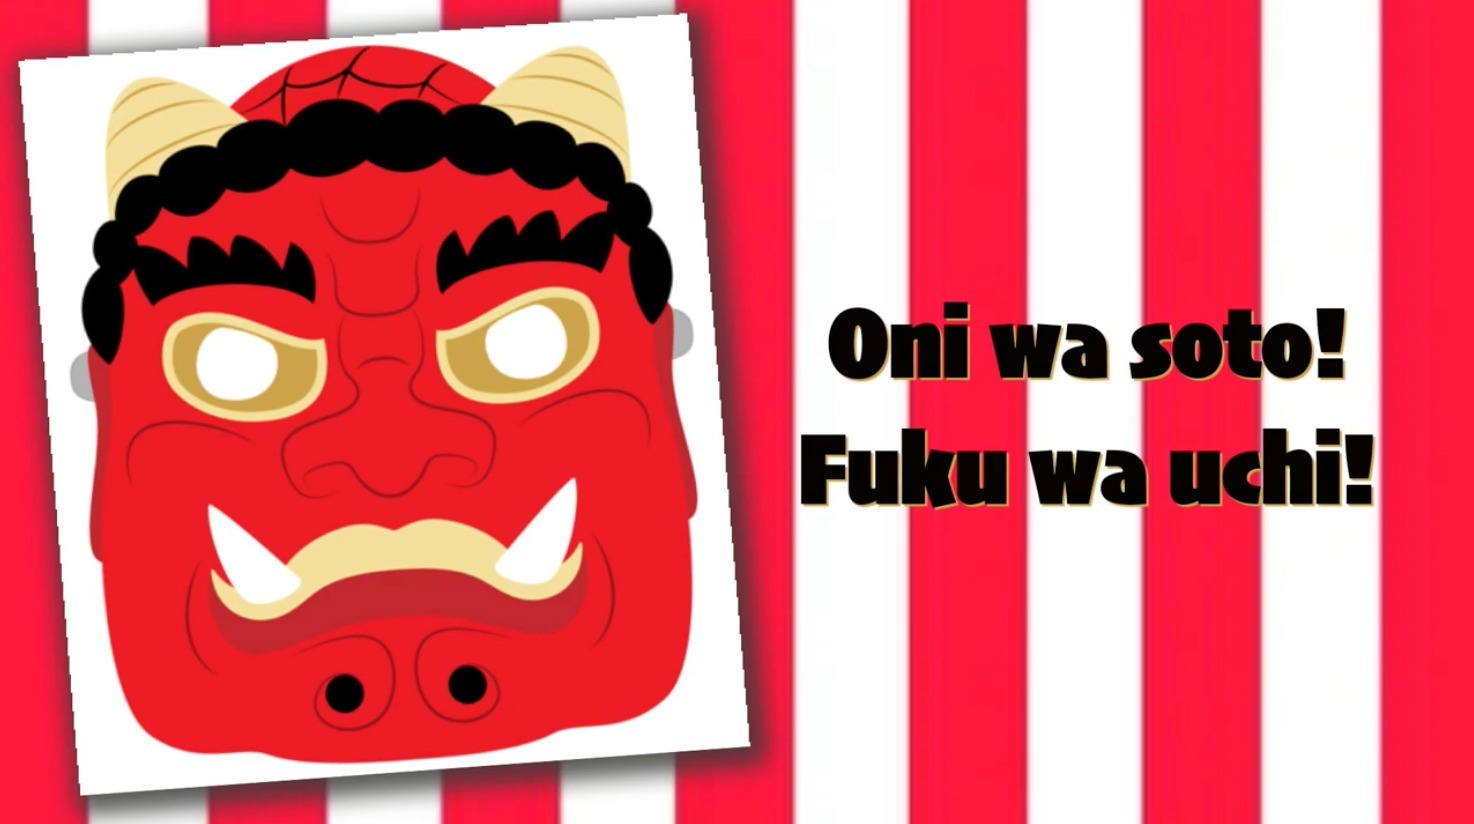 Demons out! Good luck in! Happy Setsubun!